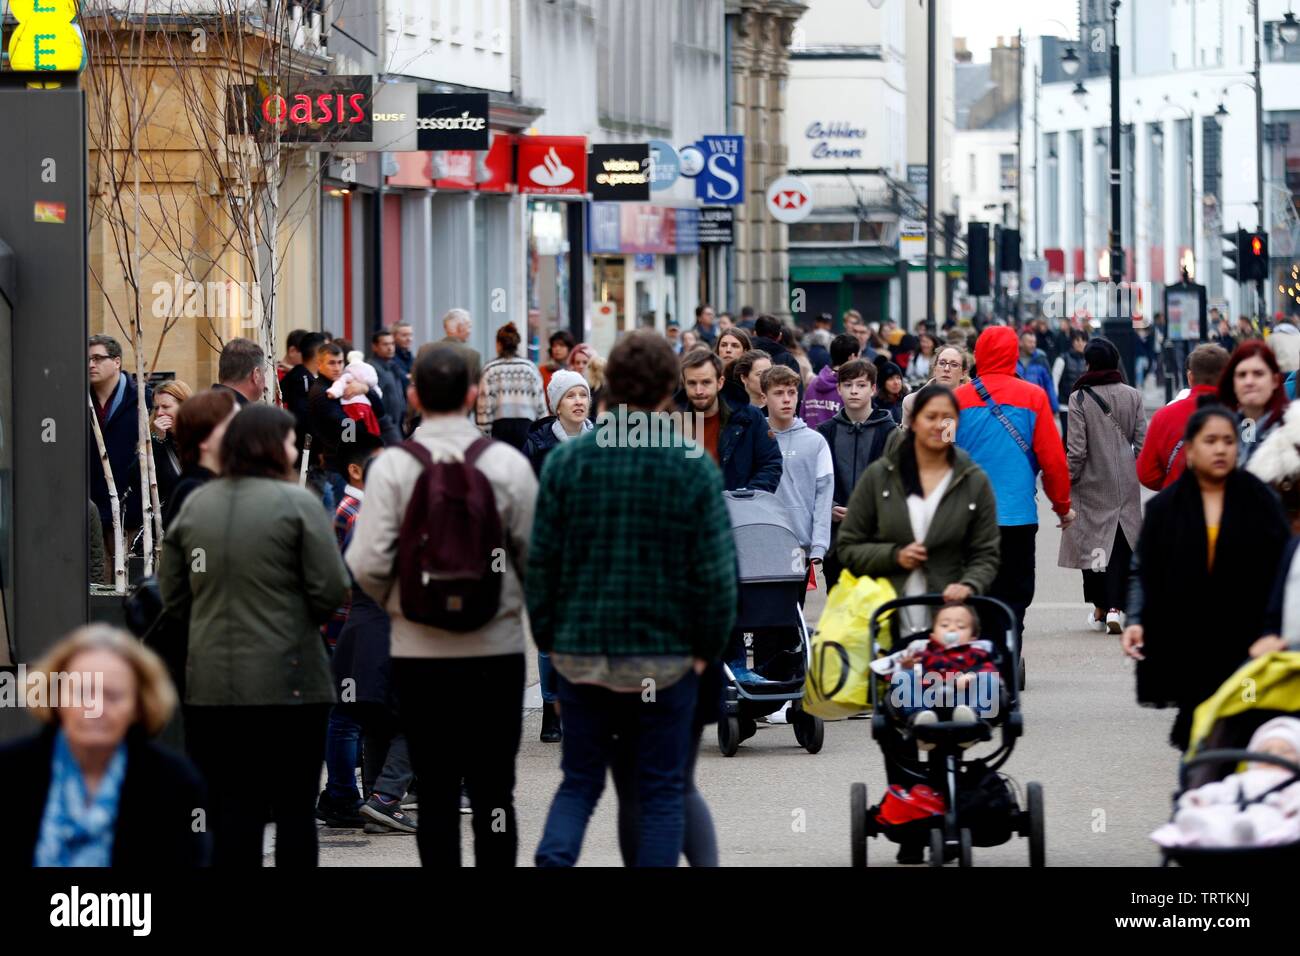 High Street, Cheltenham. Boxing Day sales and shoppers in Cheltenham. 26/12/2018  Picture by Andrew Higgins - Thousand Word Media, NO SALES, NO SYNDIC Stock Photo